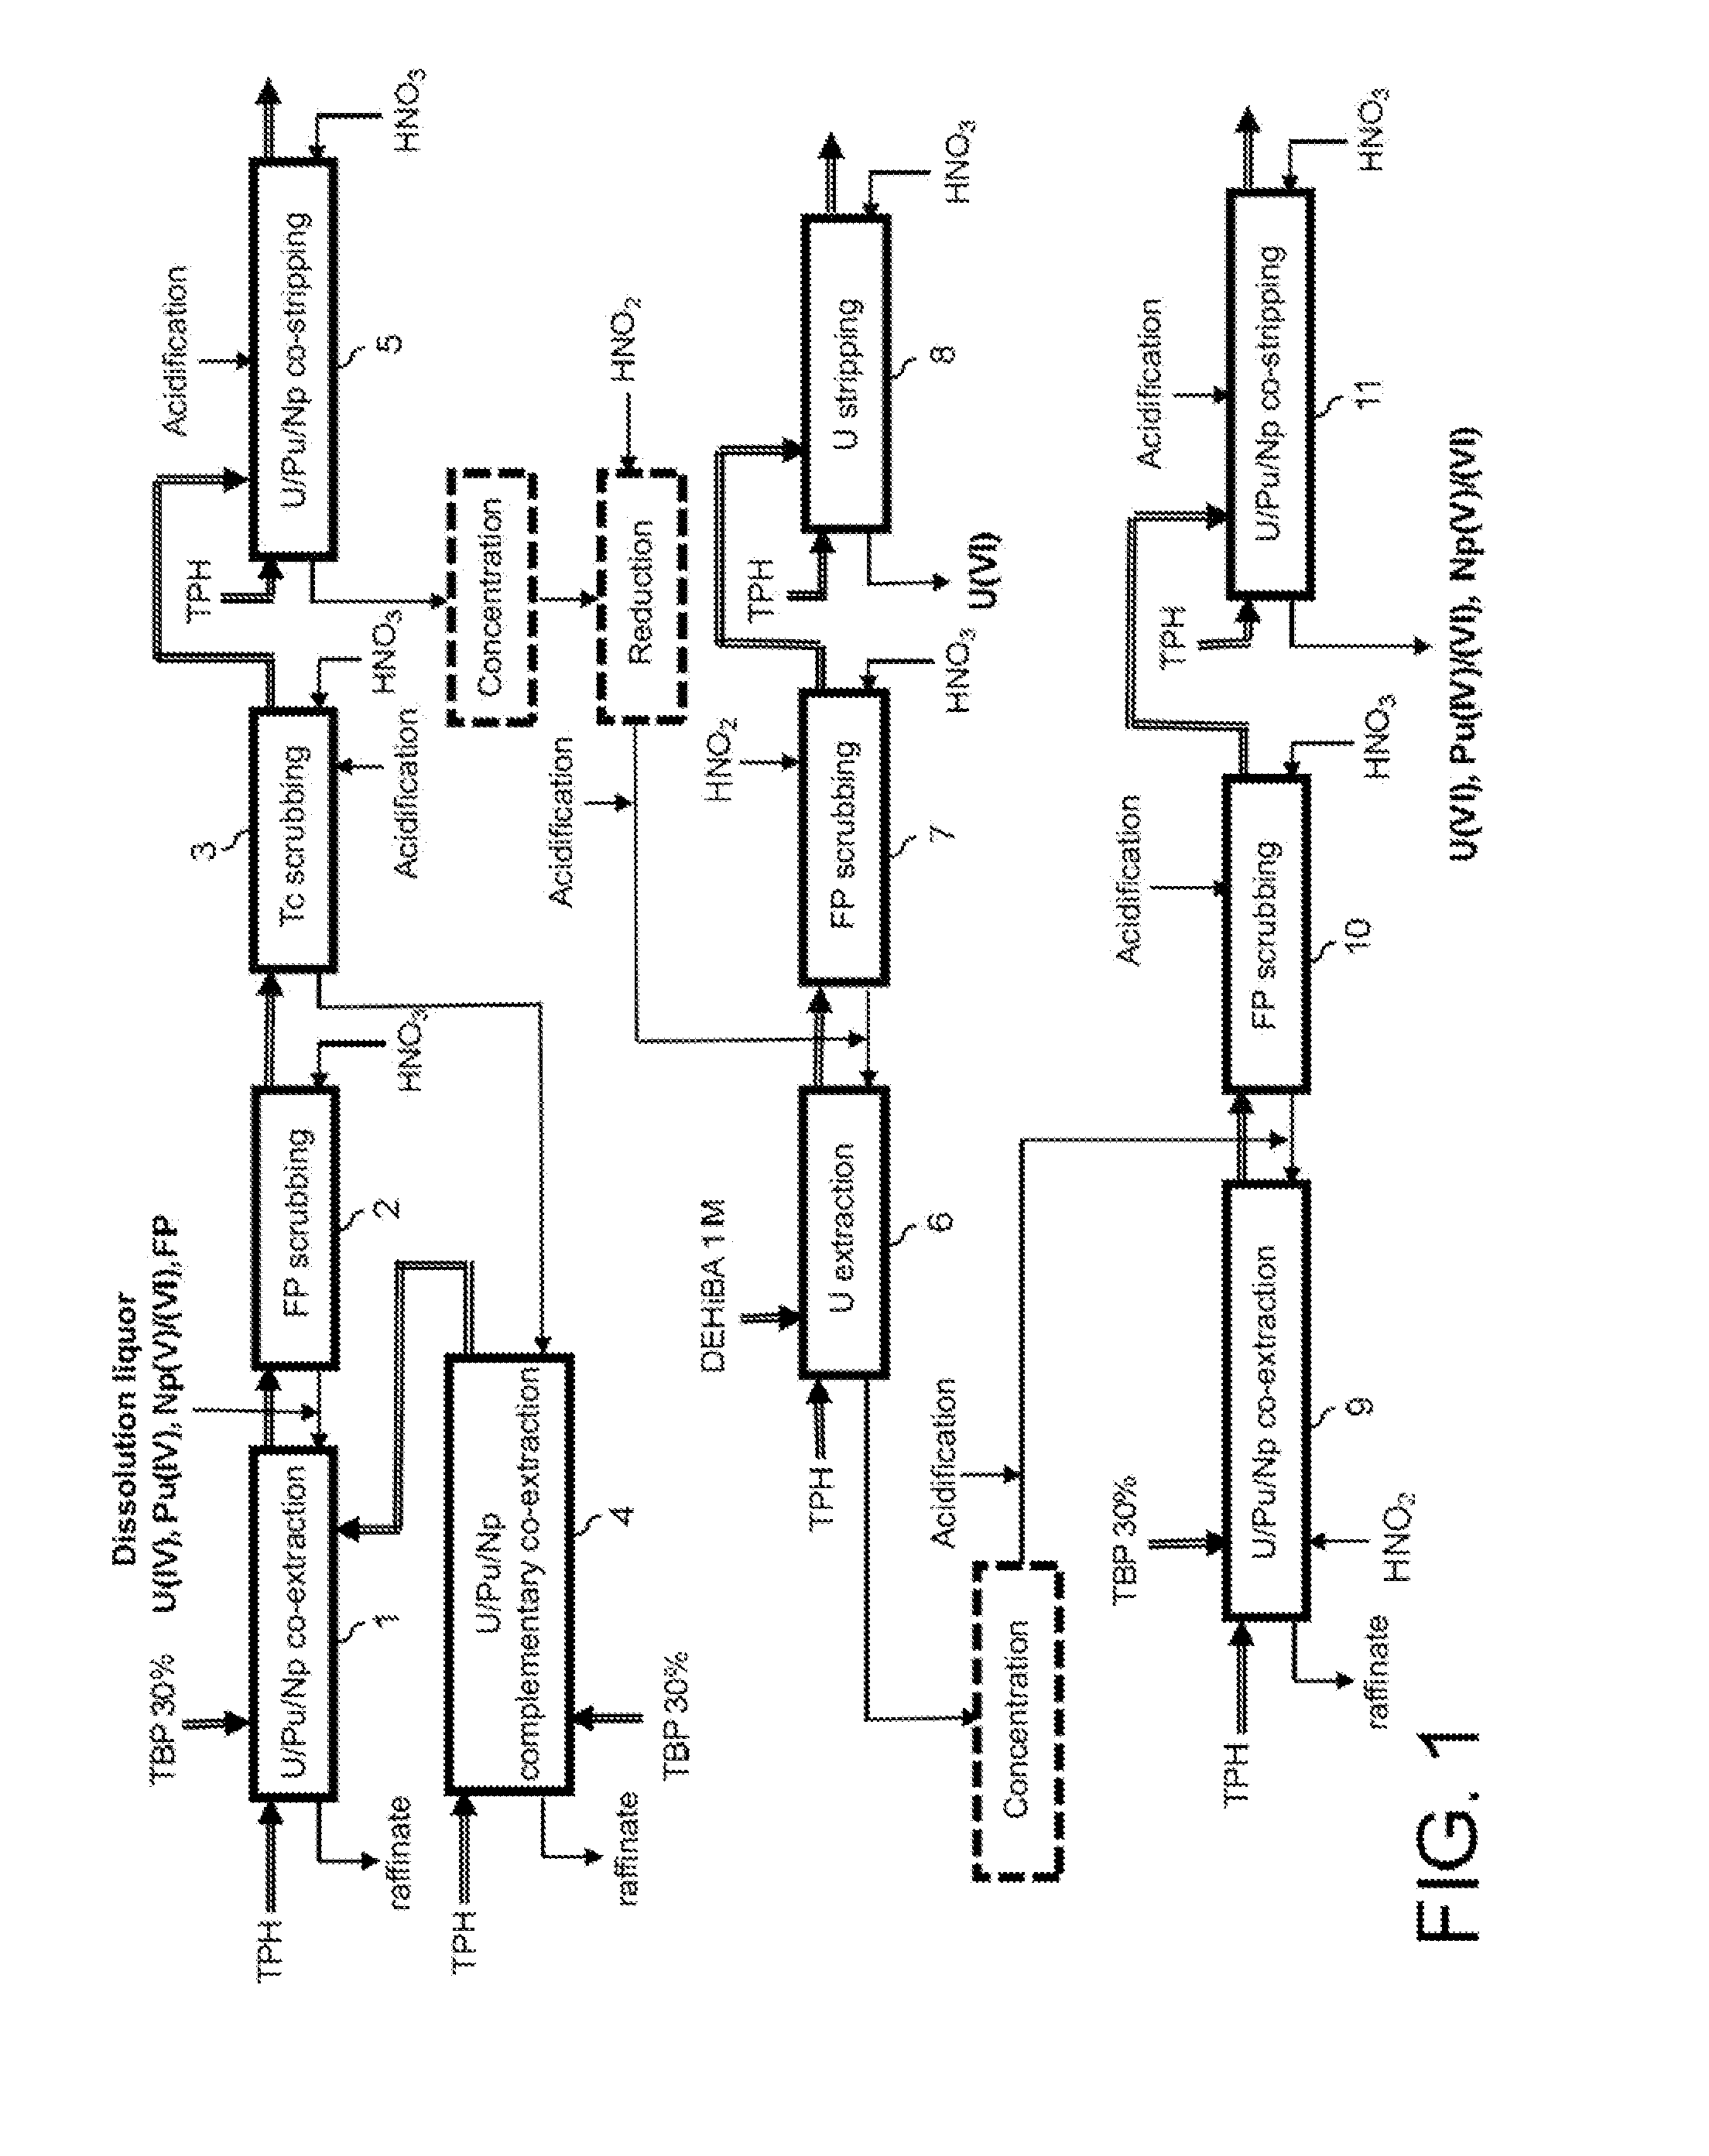 Process for reprocessing spent nuclear fuel not requiring a plutonium-reducing stripping operation